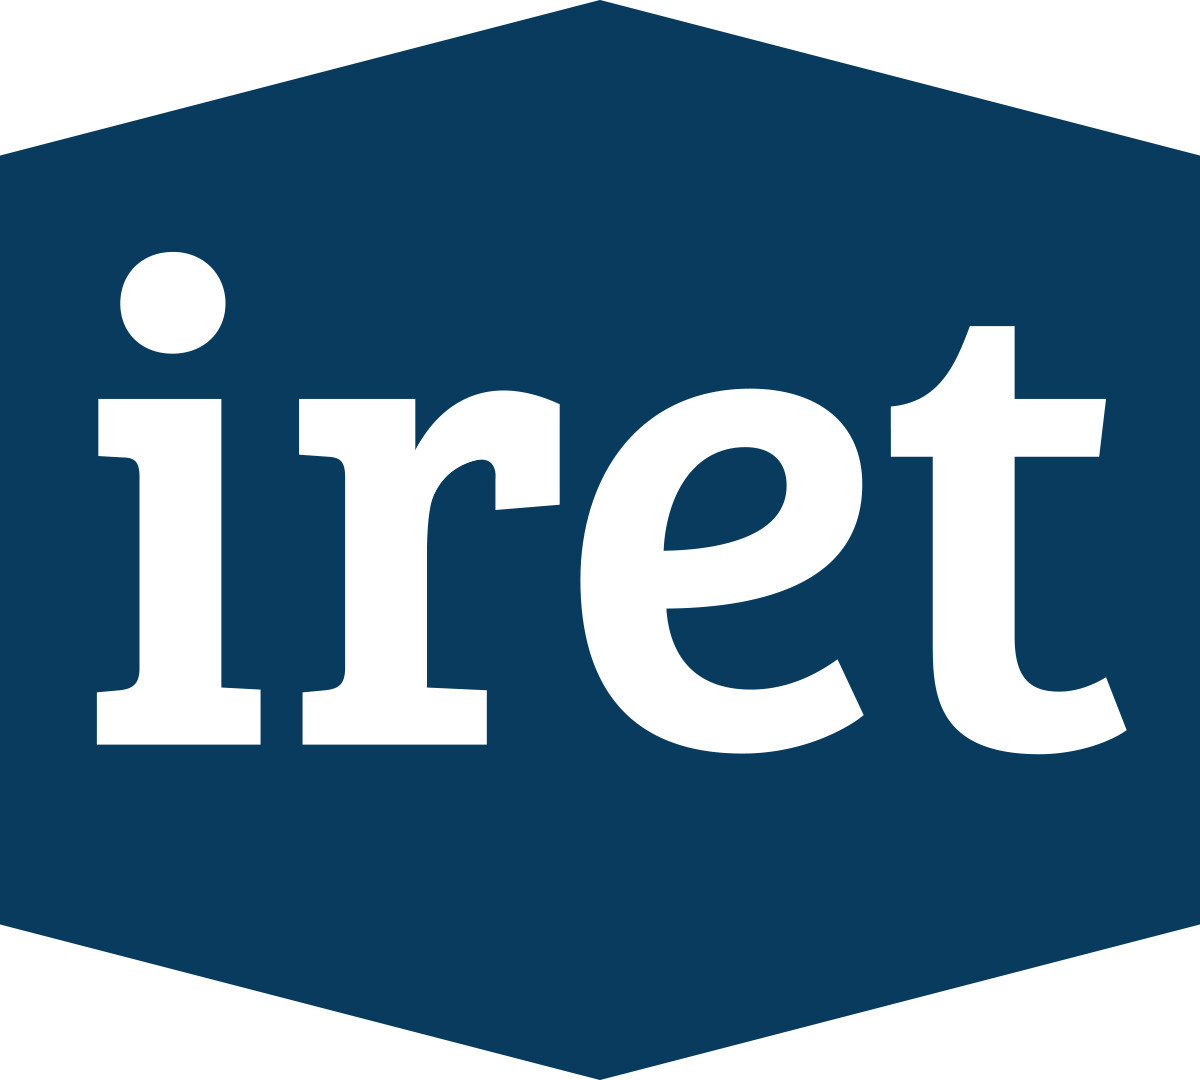 IRET Announces Dates of 2nd Quarter 2019 Earnings Release and Conference Call